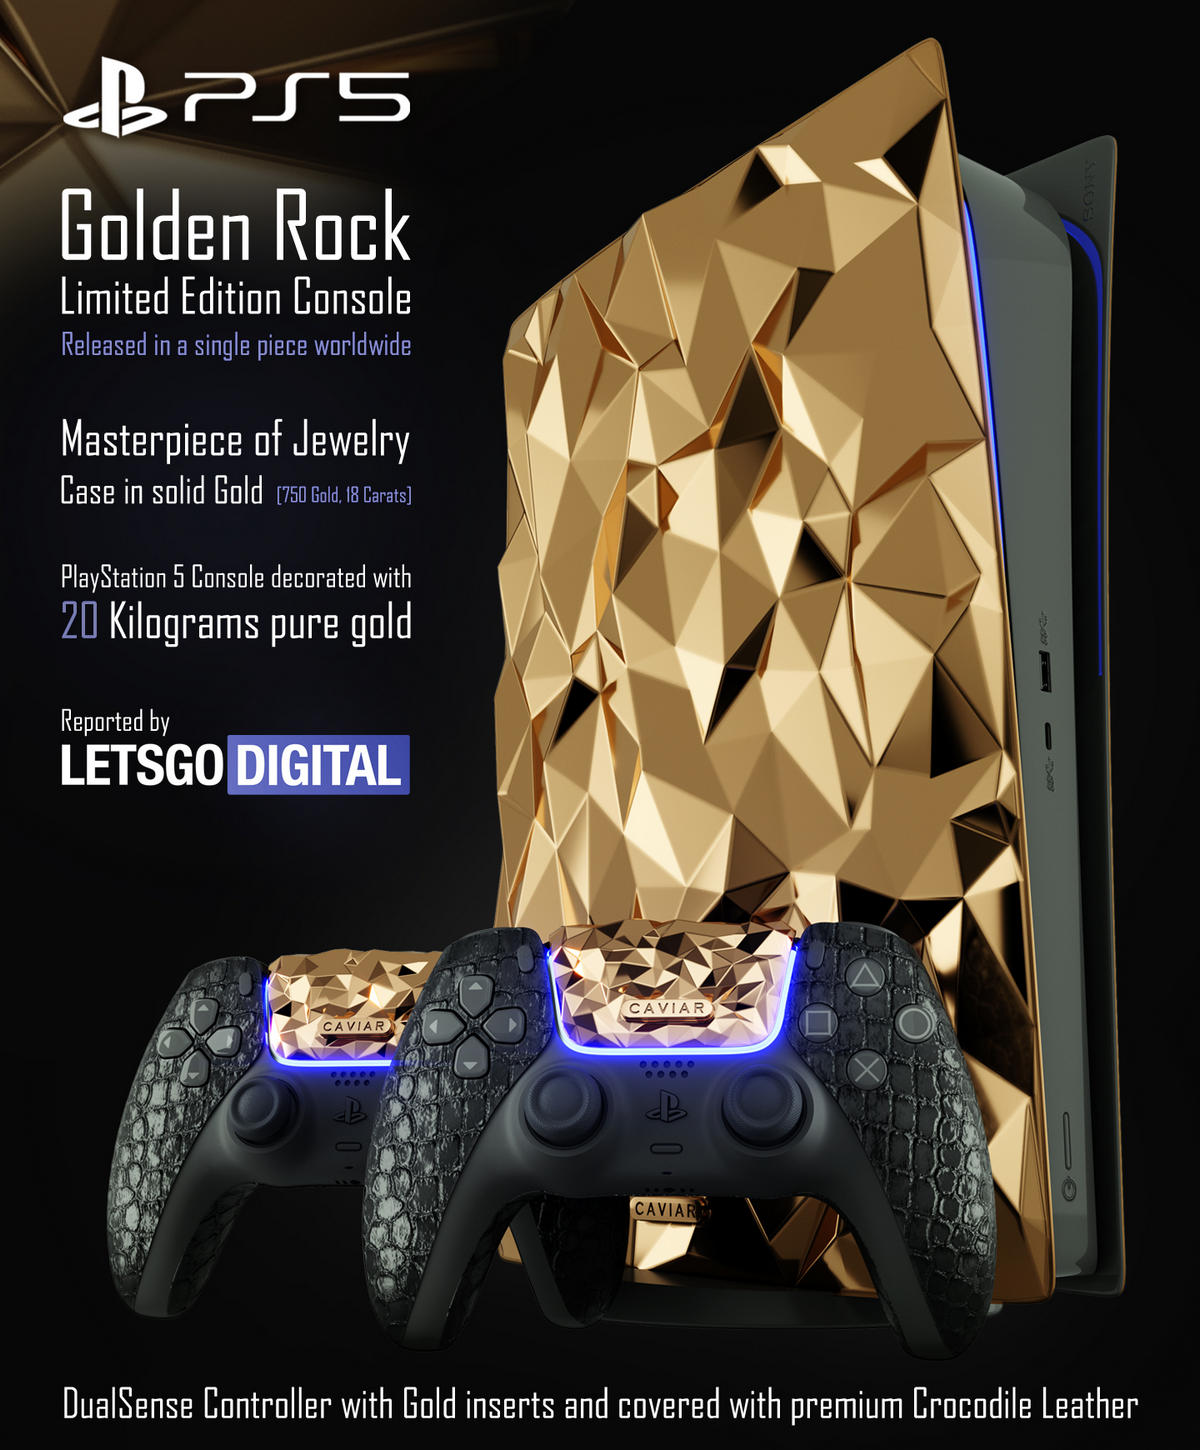 Luxurious gold-plated PS5 with 24 carat controllers is bought by r  for £8,000